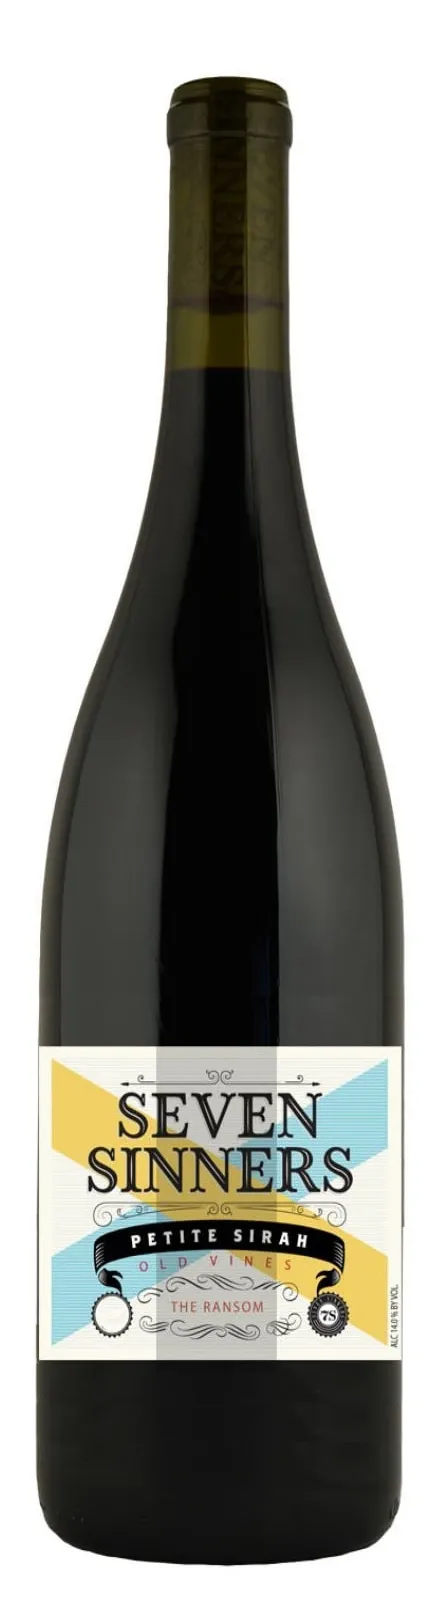 Bottle of Seven Sinners Petite Sirah (The Ransom)with label visible